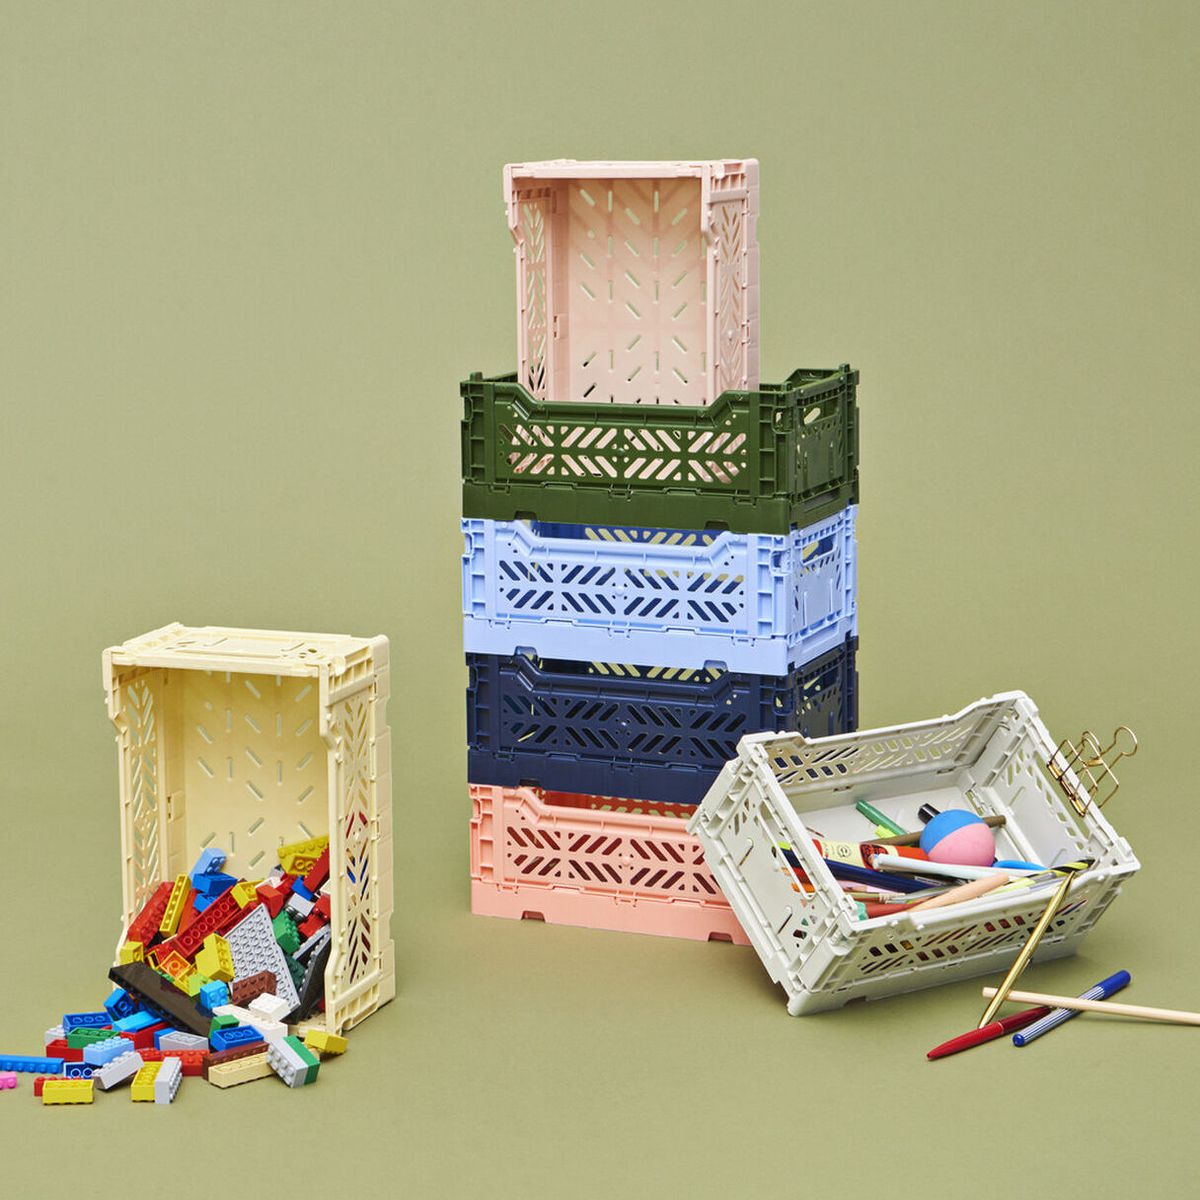 Stacks of colorful plastic crates with toy bricks inside.